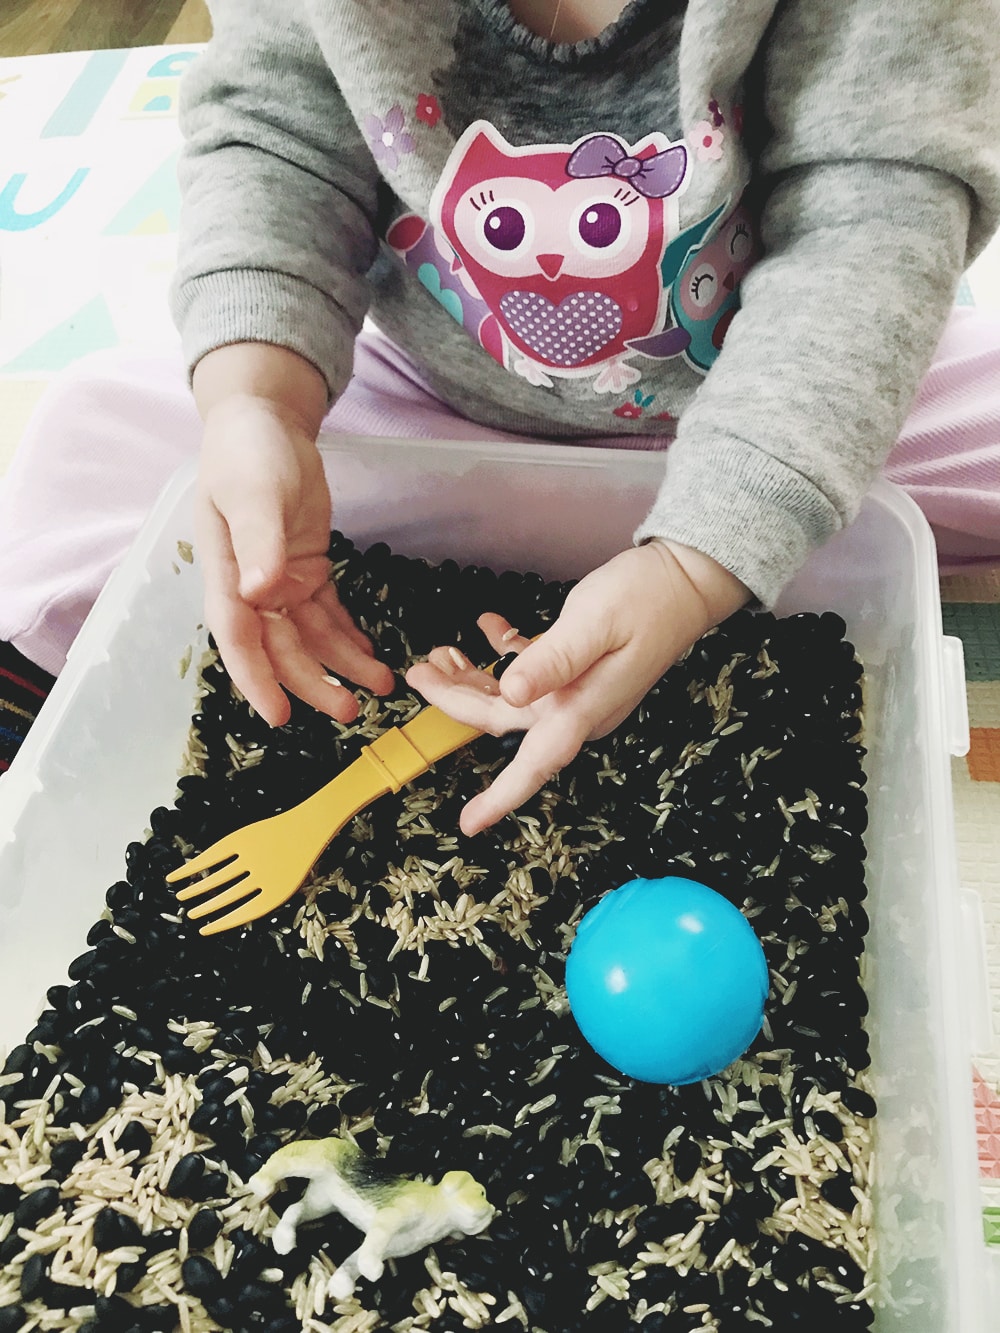 Not sure how to entertain your sick toddler? Check out these easy toddler activities to brighten up their day! You'll both be glad you did.